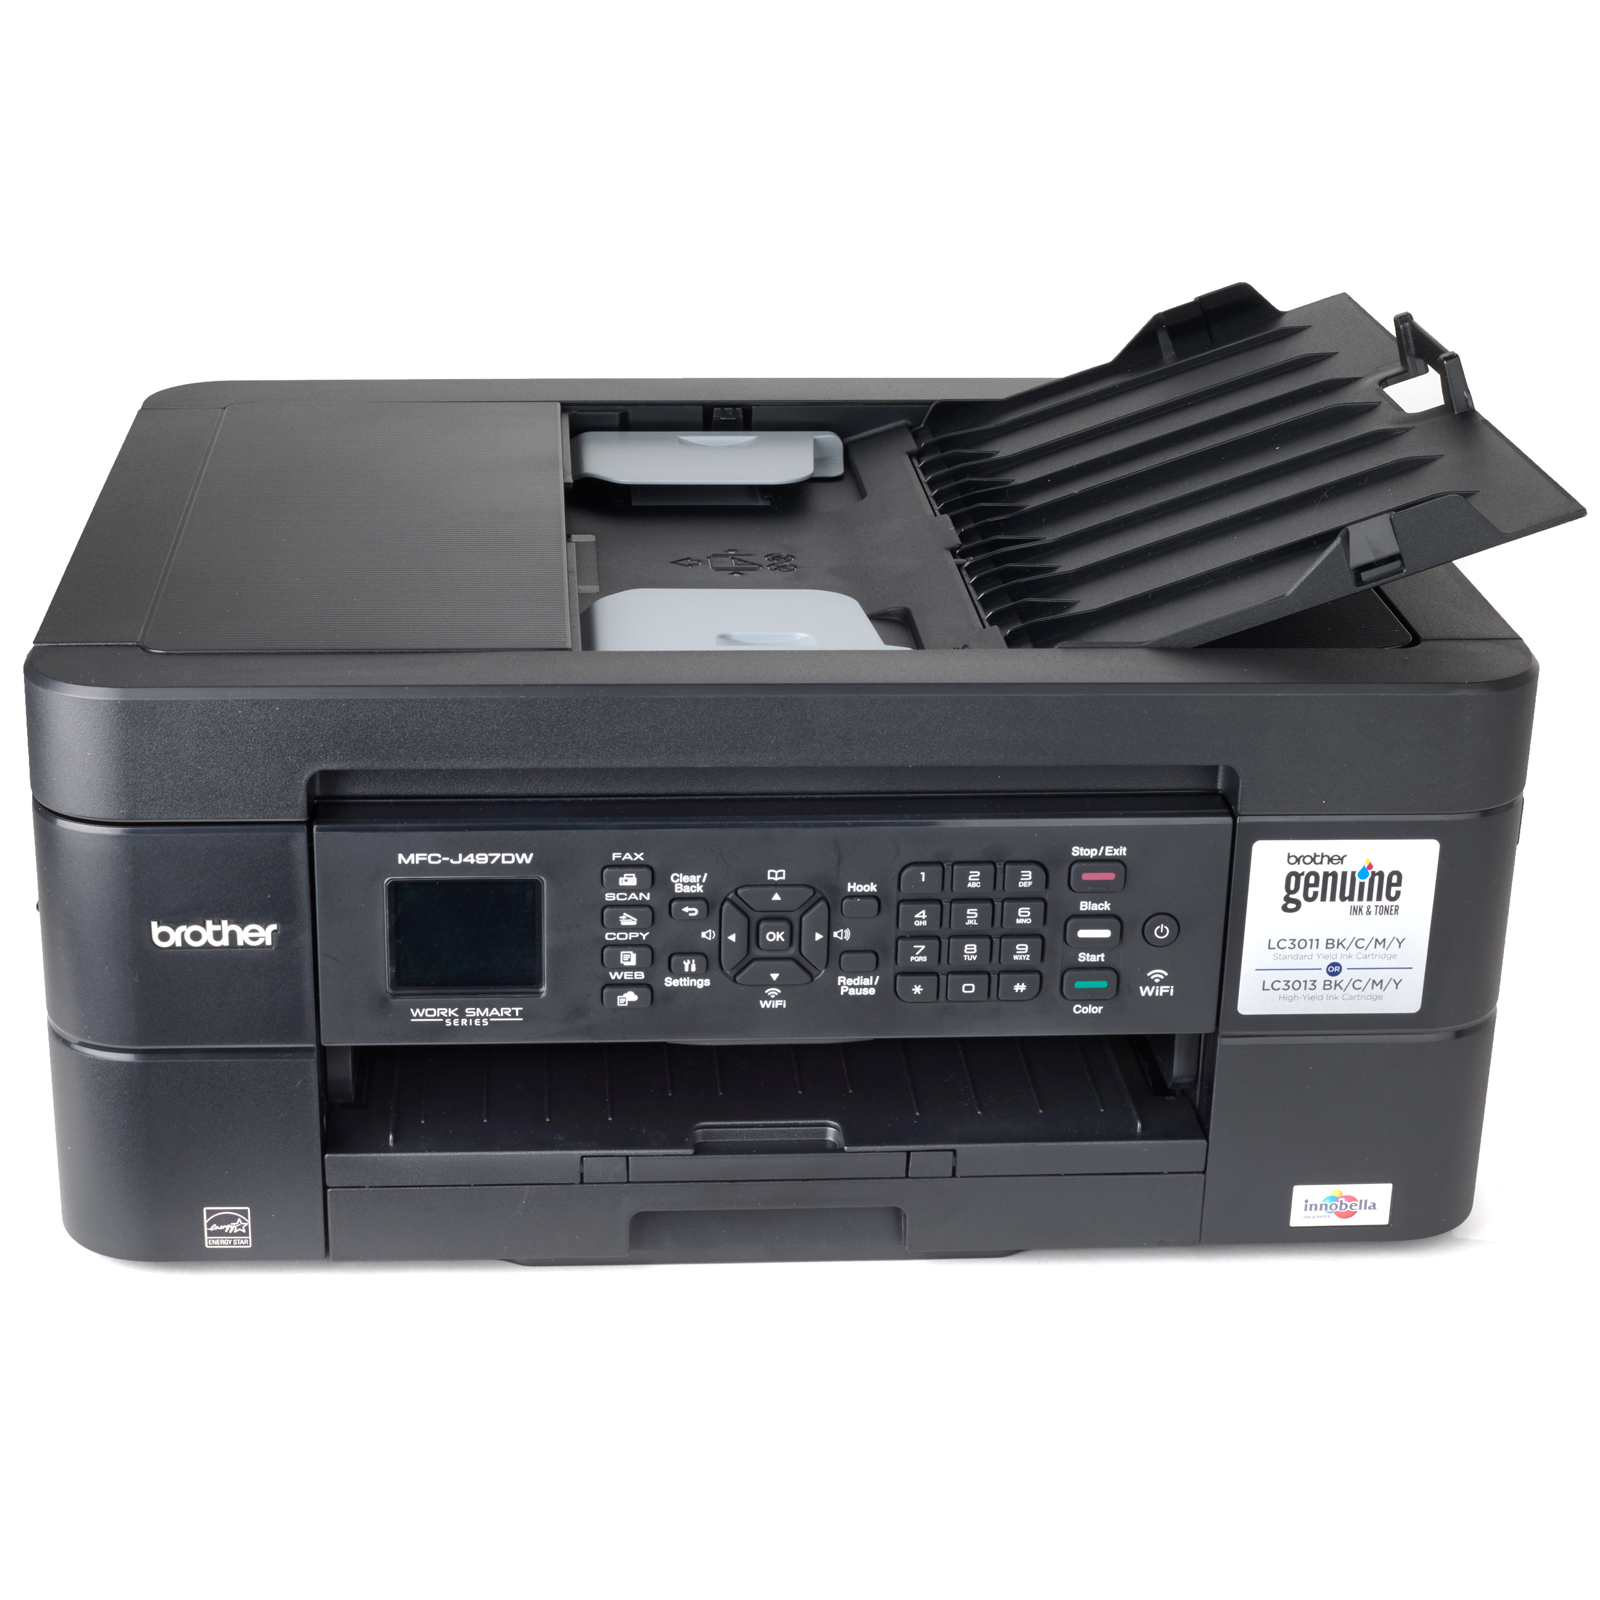 Brother Work Smart Series MFC-J497DW Wireless All-In-One Inkjet Printer (USED) - image 4 of 5